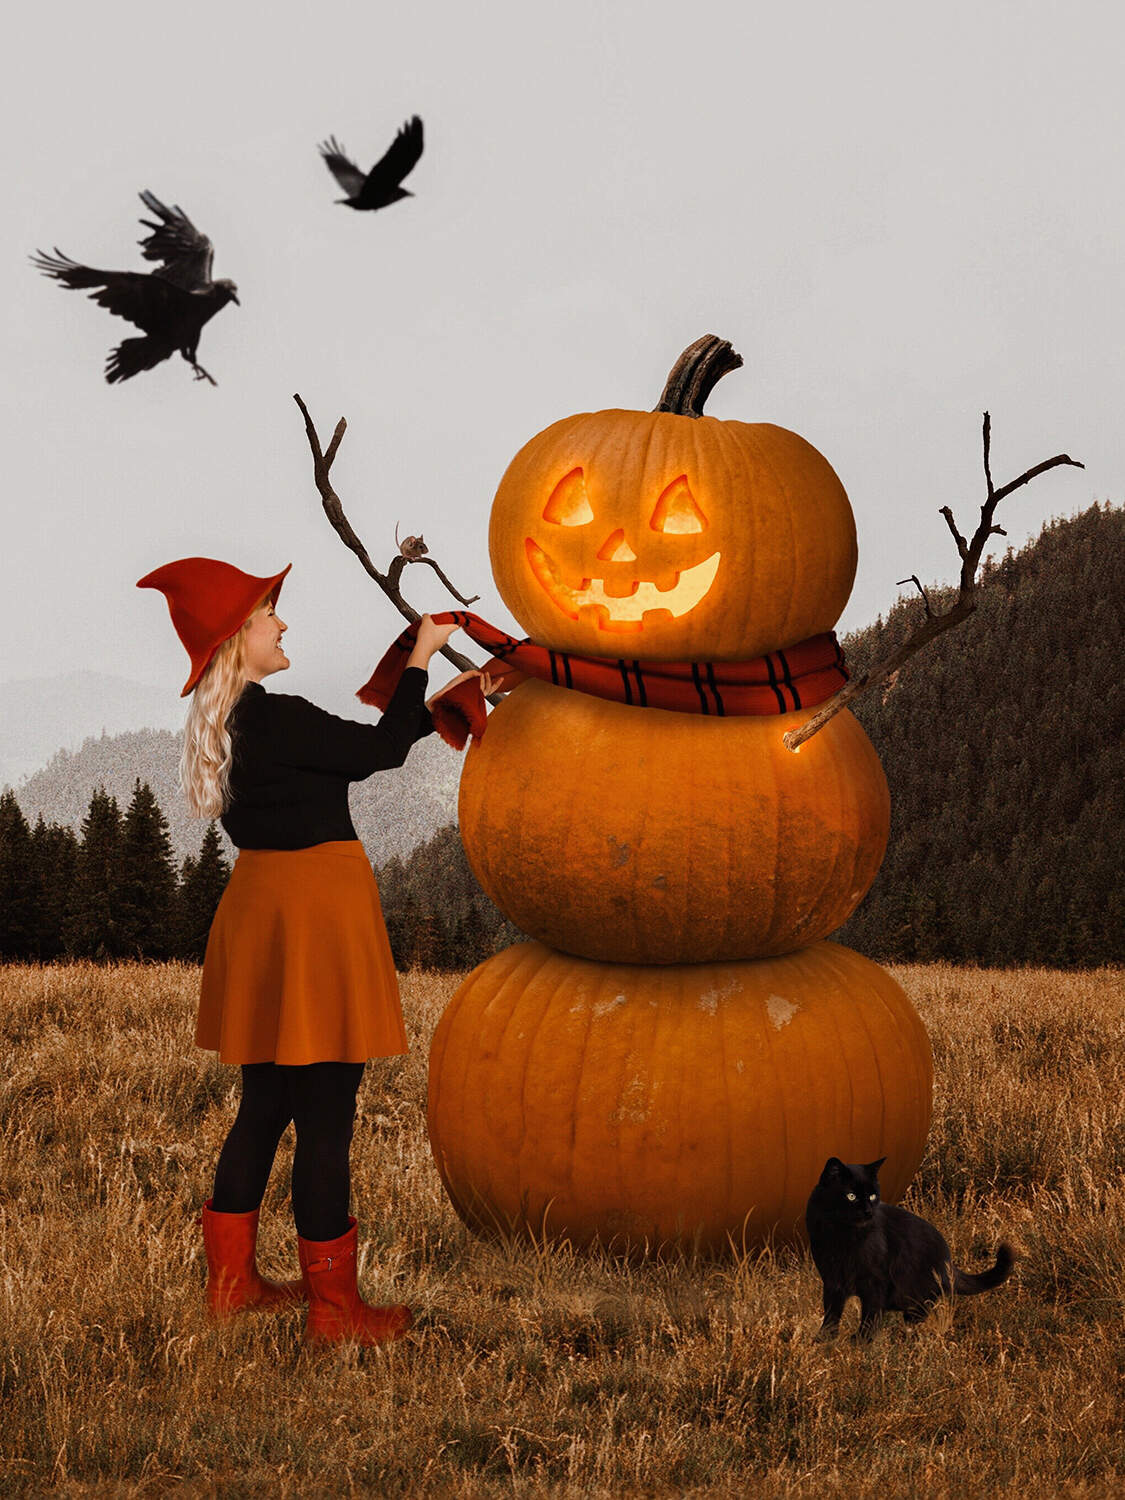 Female subject places scarf around pumpkins stacked like a snowman. There are crows in the background in the forest. It has an overall Halloween vibe.